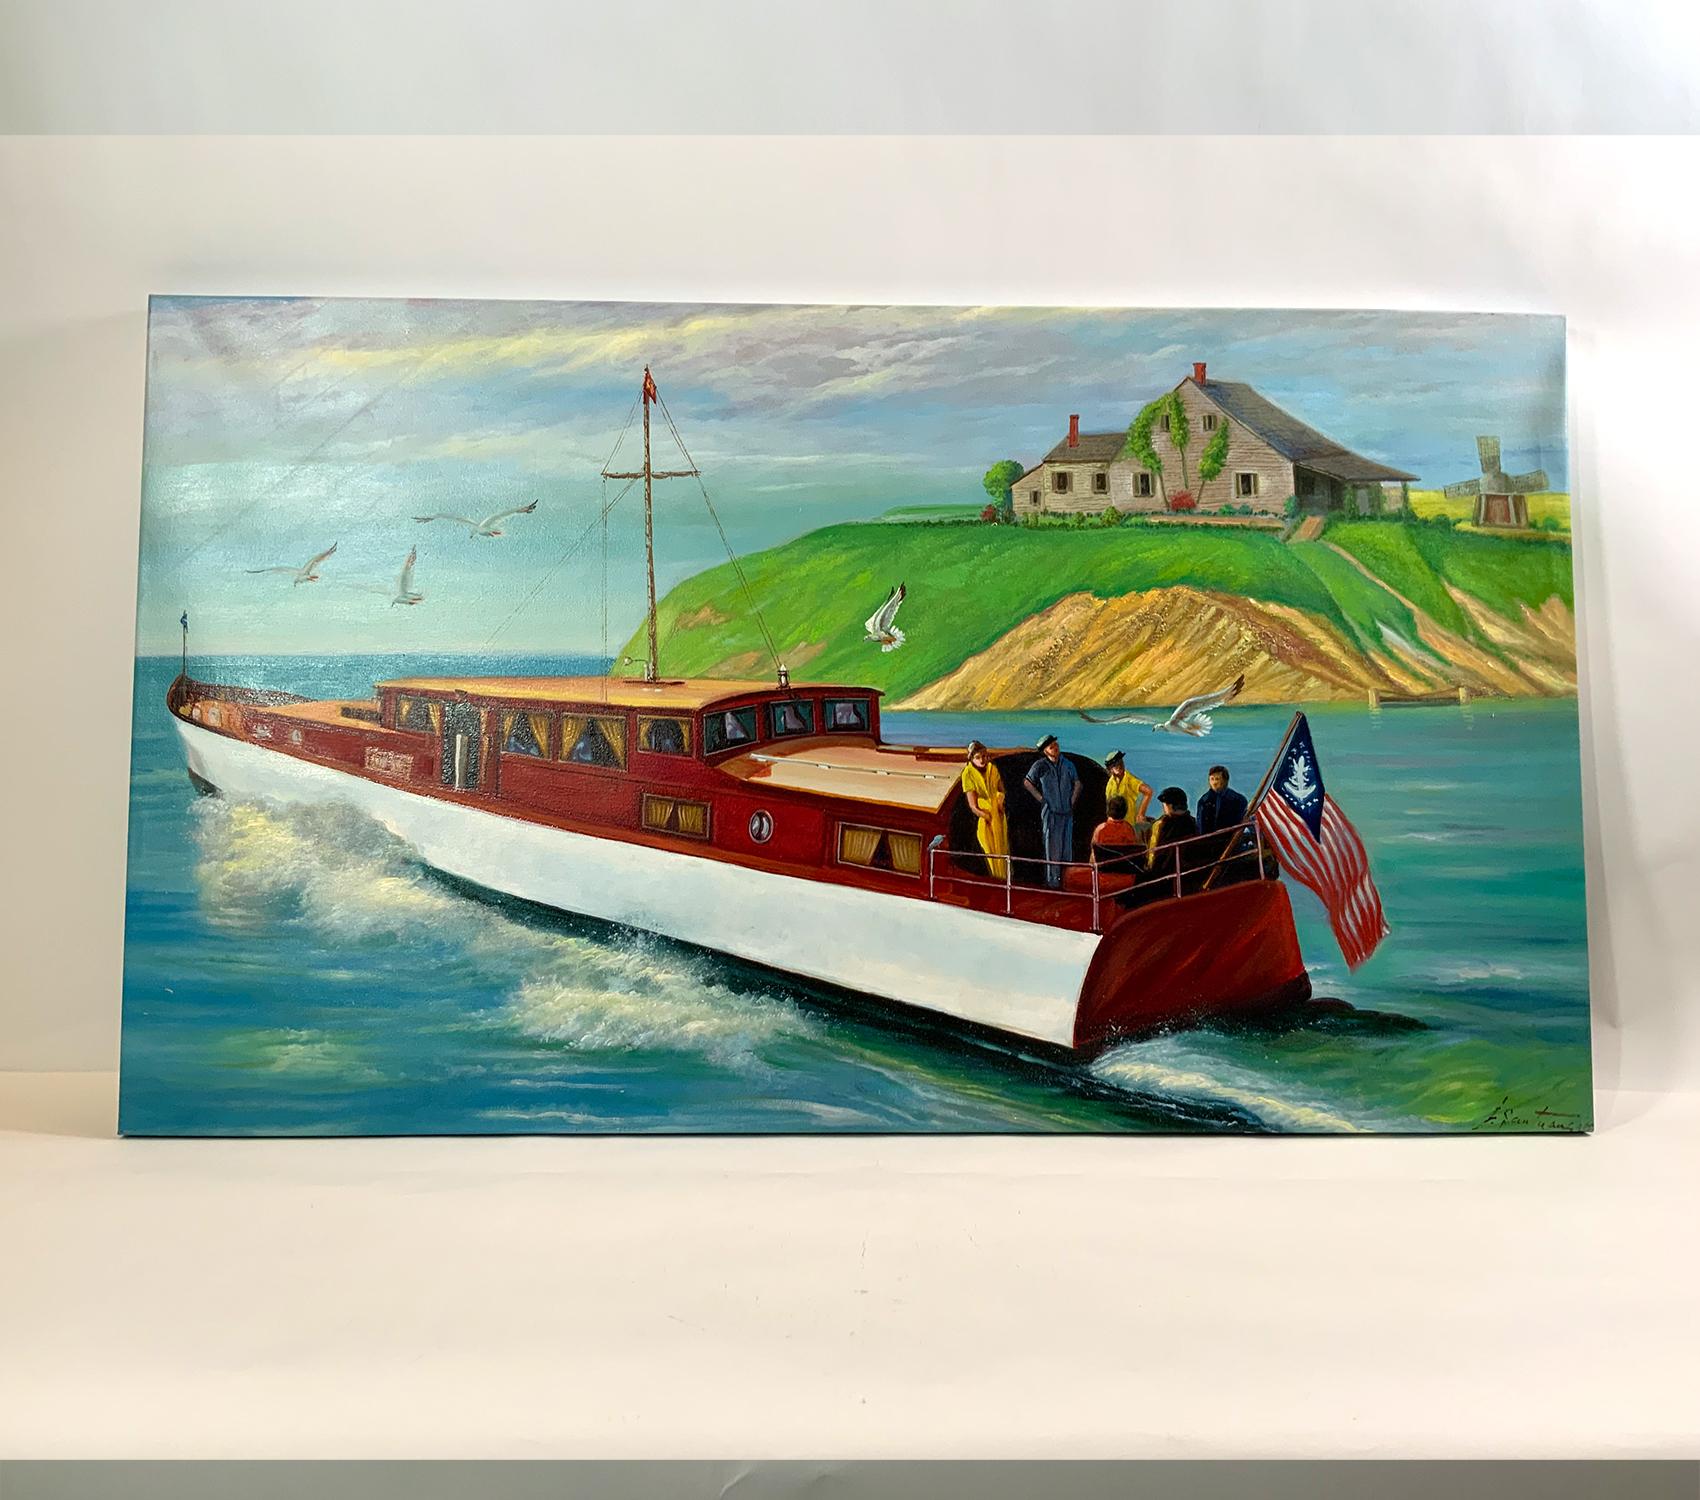 Oil on canvas showing a motor yacht passing an island cottage on Block Island, Rhode Island. Yacht is flying a yacht ensign. Large piece. Gallery wrap over a crude frame.

Weight: 7 LBS
Overall Dimensions: 32” H x 56